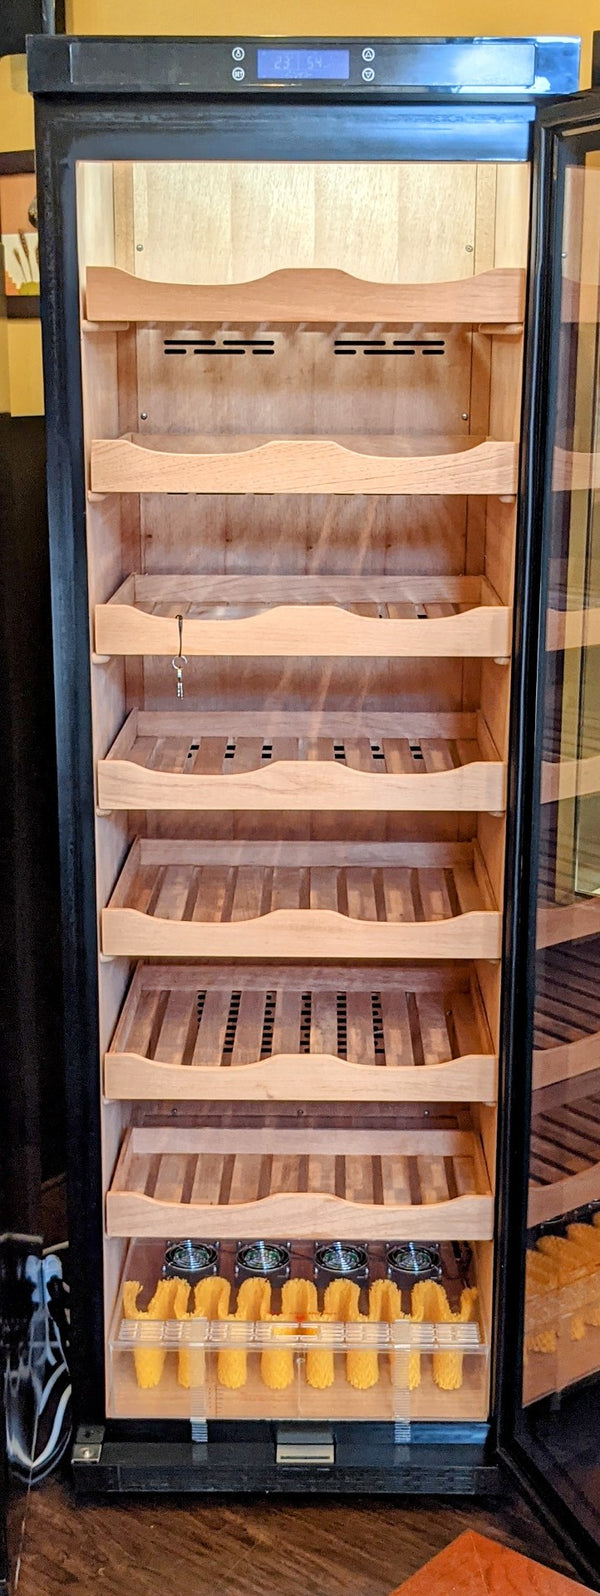 7 Shelf Electric 1500+CC Cabinet Humidor. NOT AVAILABLE FOR SHIPPING, LOCAL PICK-UP ONLY! - TSC Inc. The Smokin' Cigar Inc Humidors